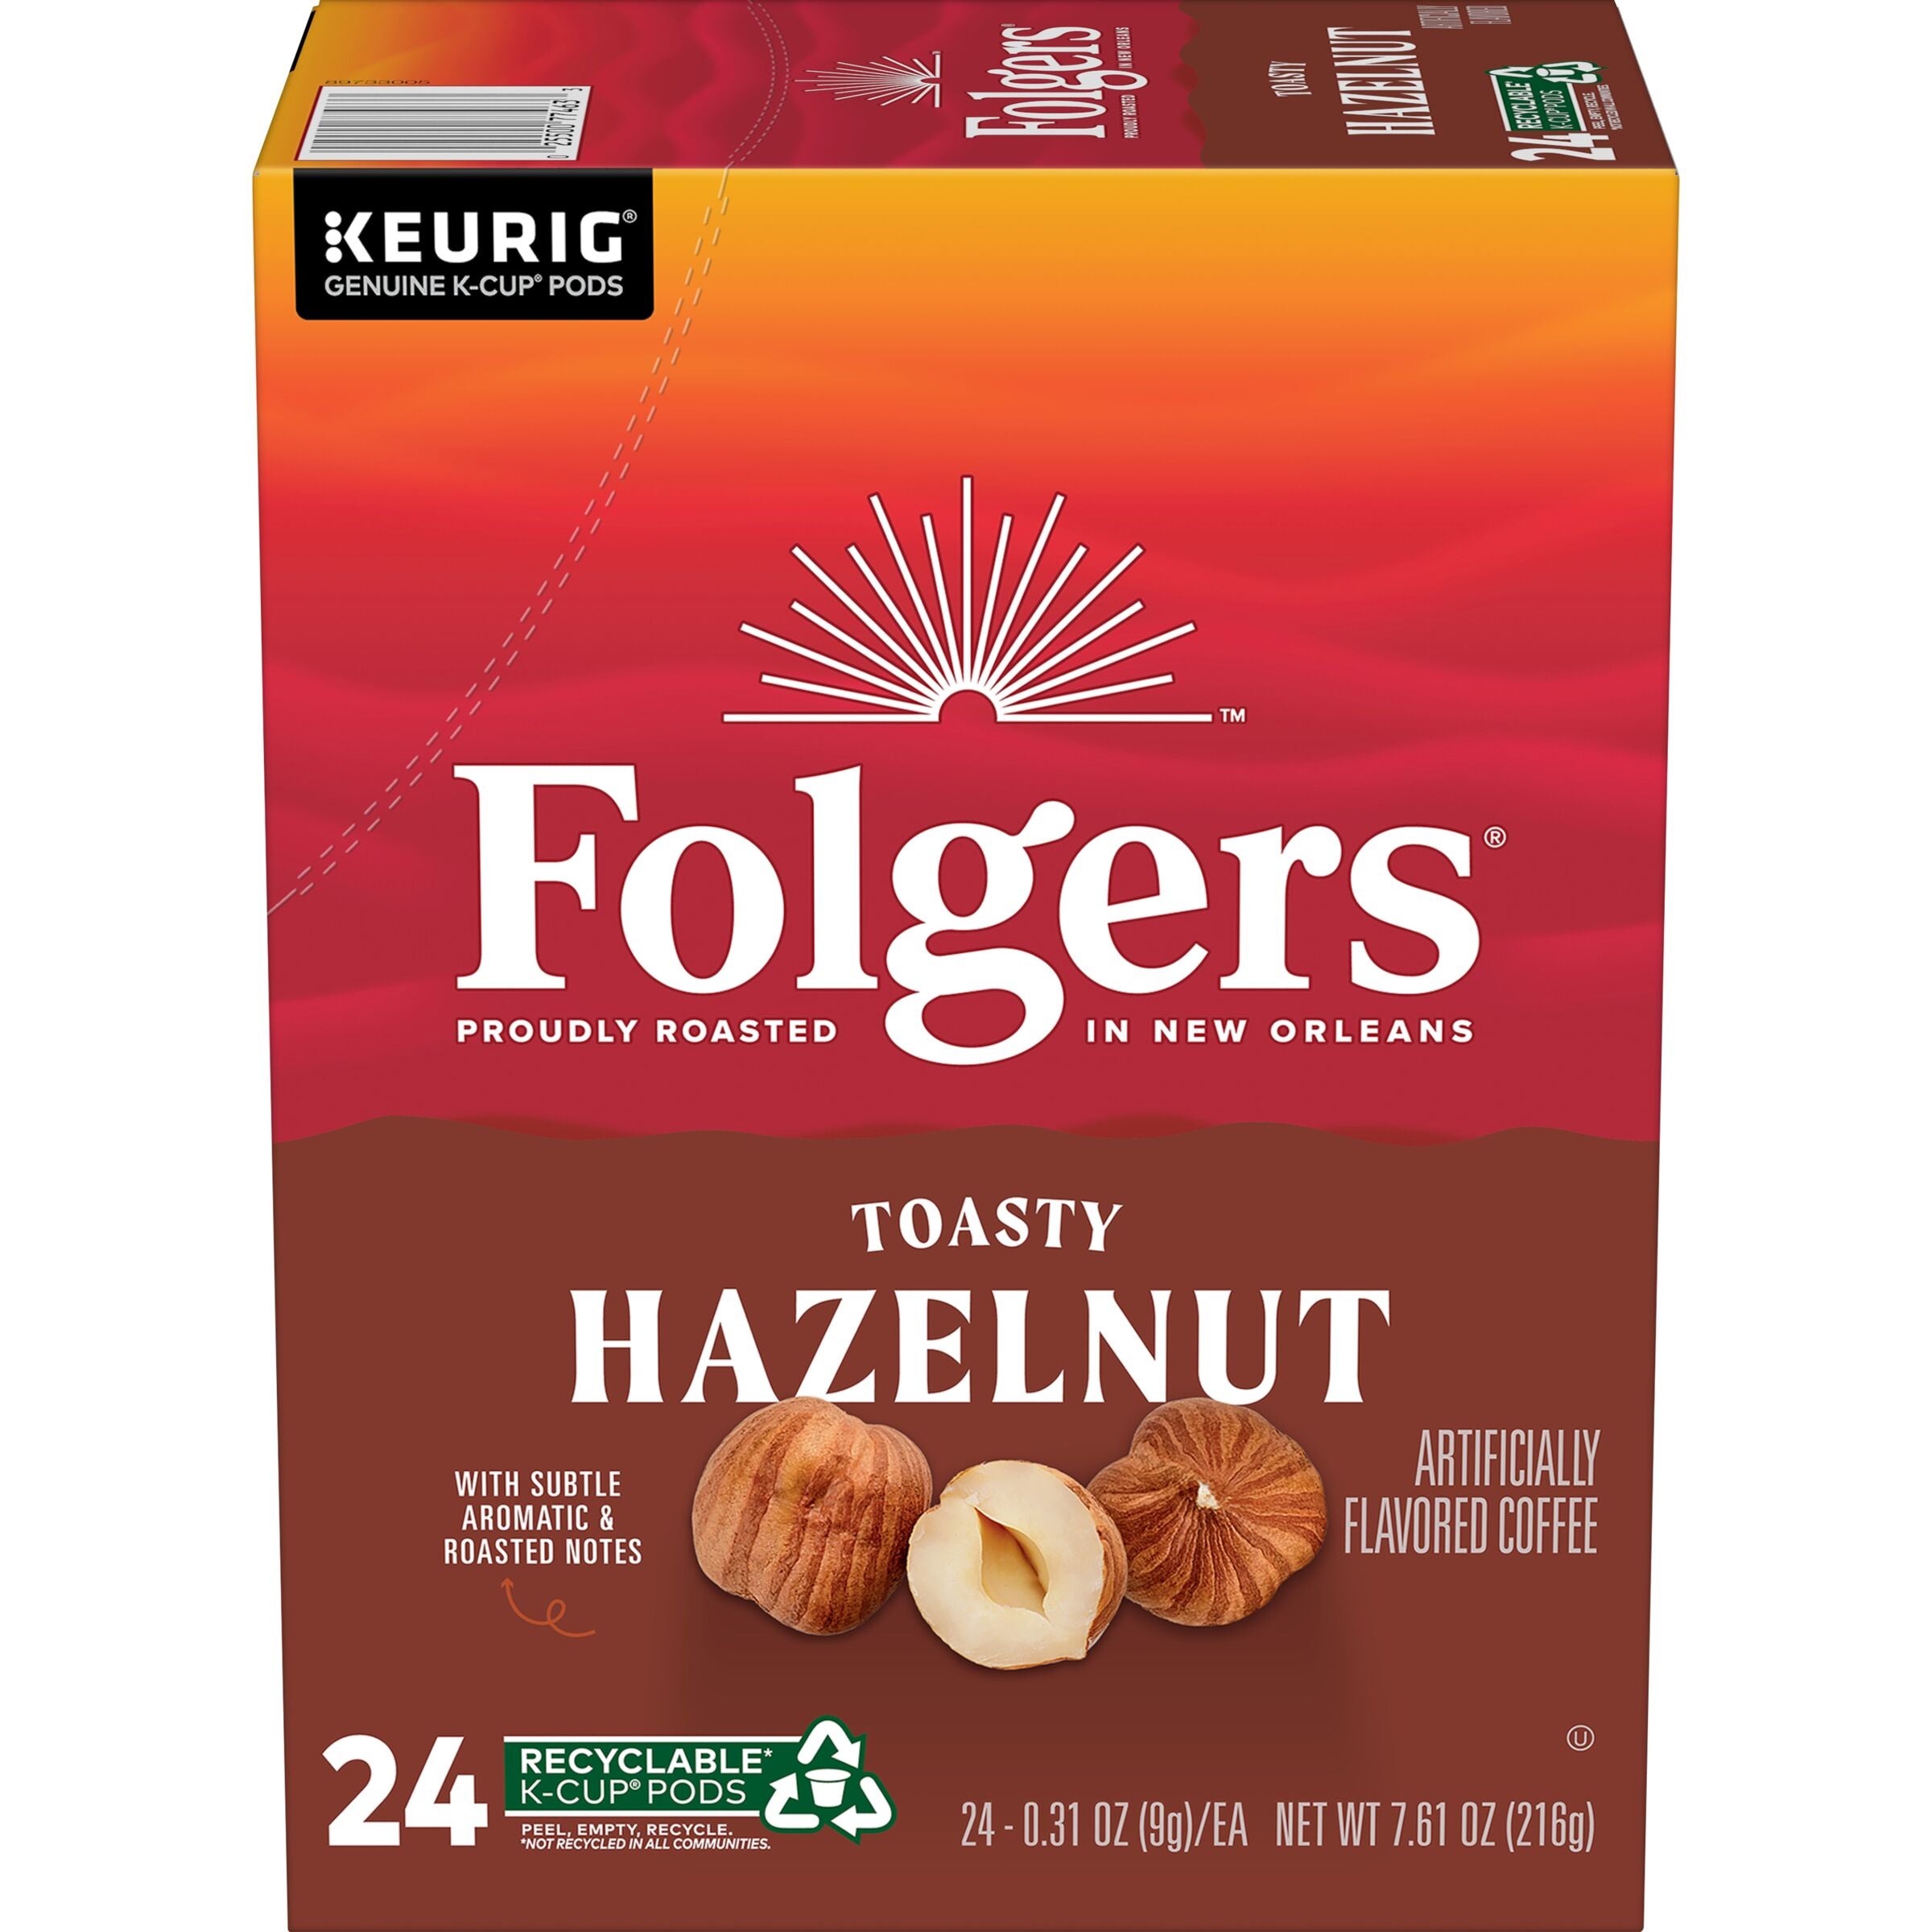 Folgers Toasty Hazelnut Flavored Coffee, K-Cup Pods